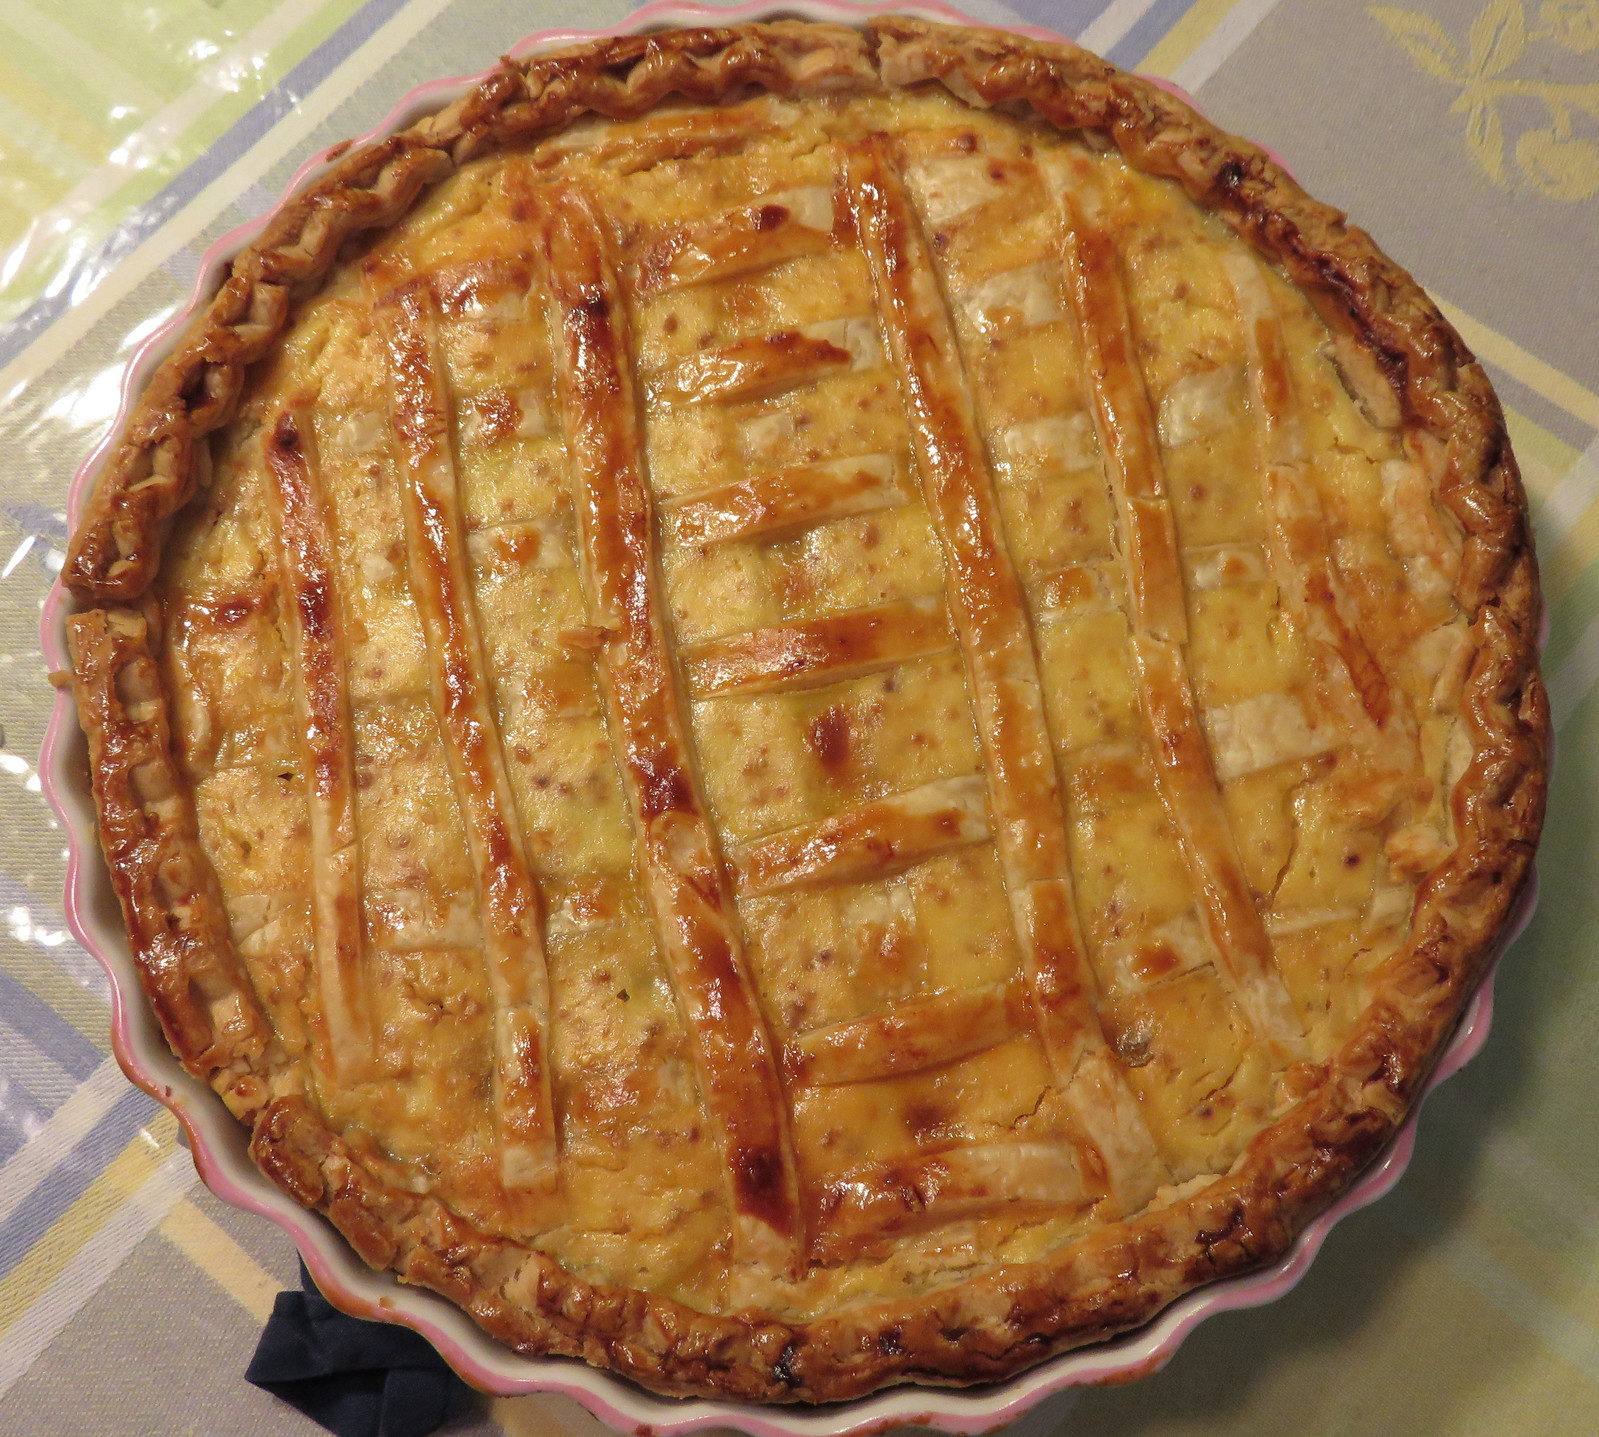 Cheese Torte. Tarte au fromage. (It is delicious!)